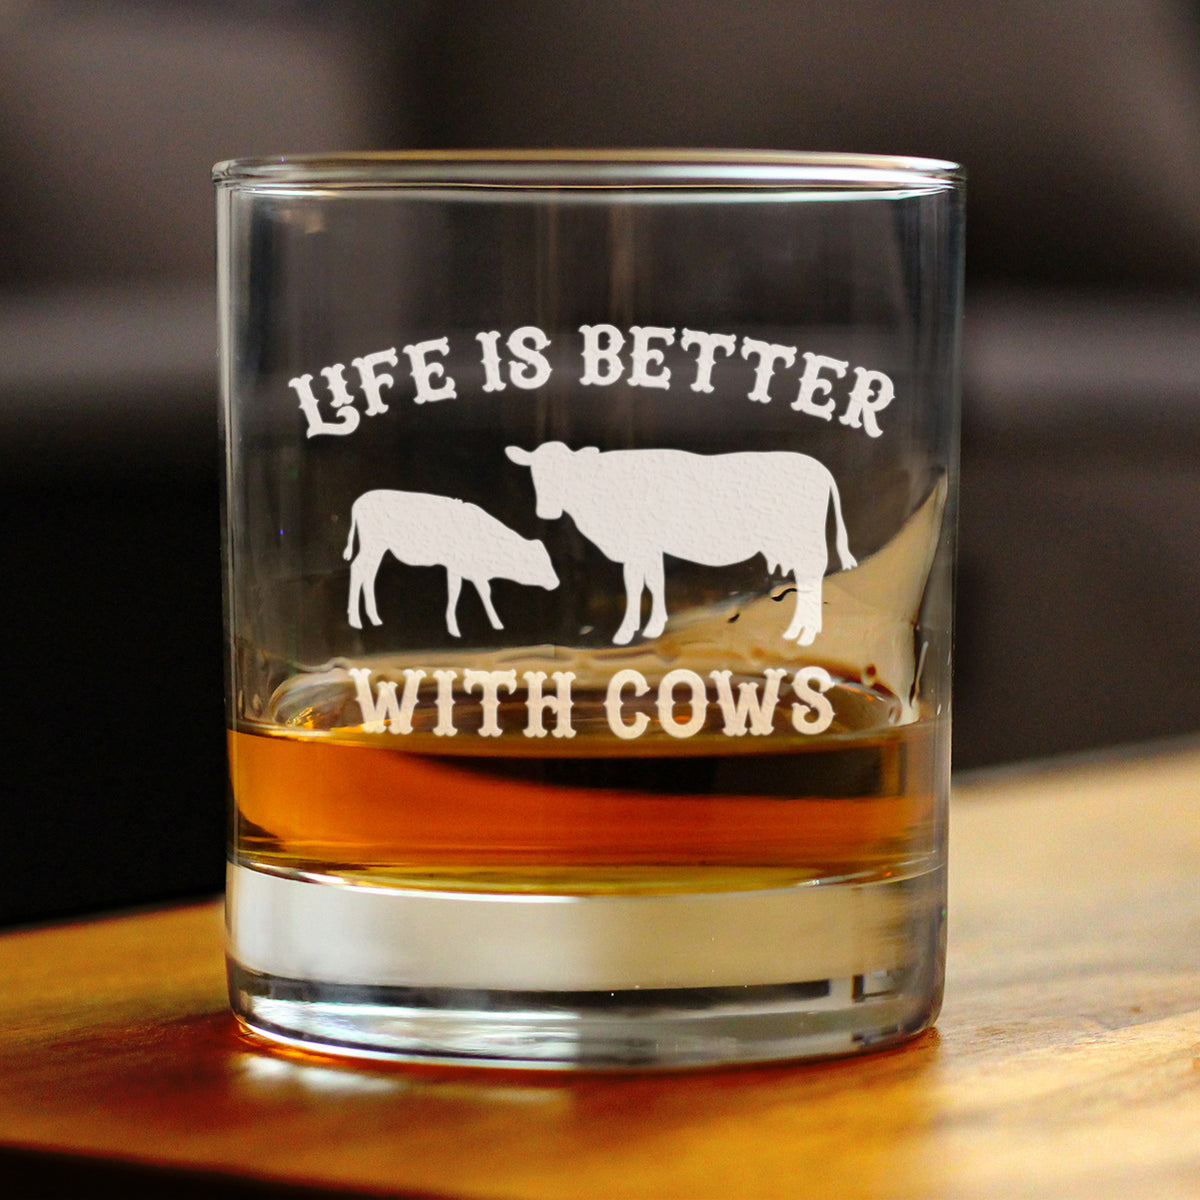 Life Is Better With Cows - Whiskey Rocks Glass Gifts - Funny Cow Gifts and Decor for Men &amp; Women - 10.25 Oz Glasses